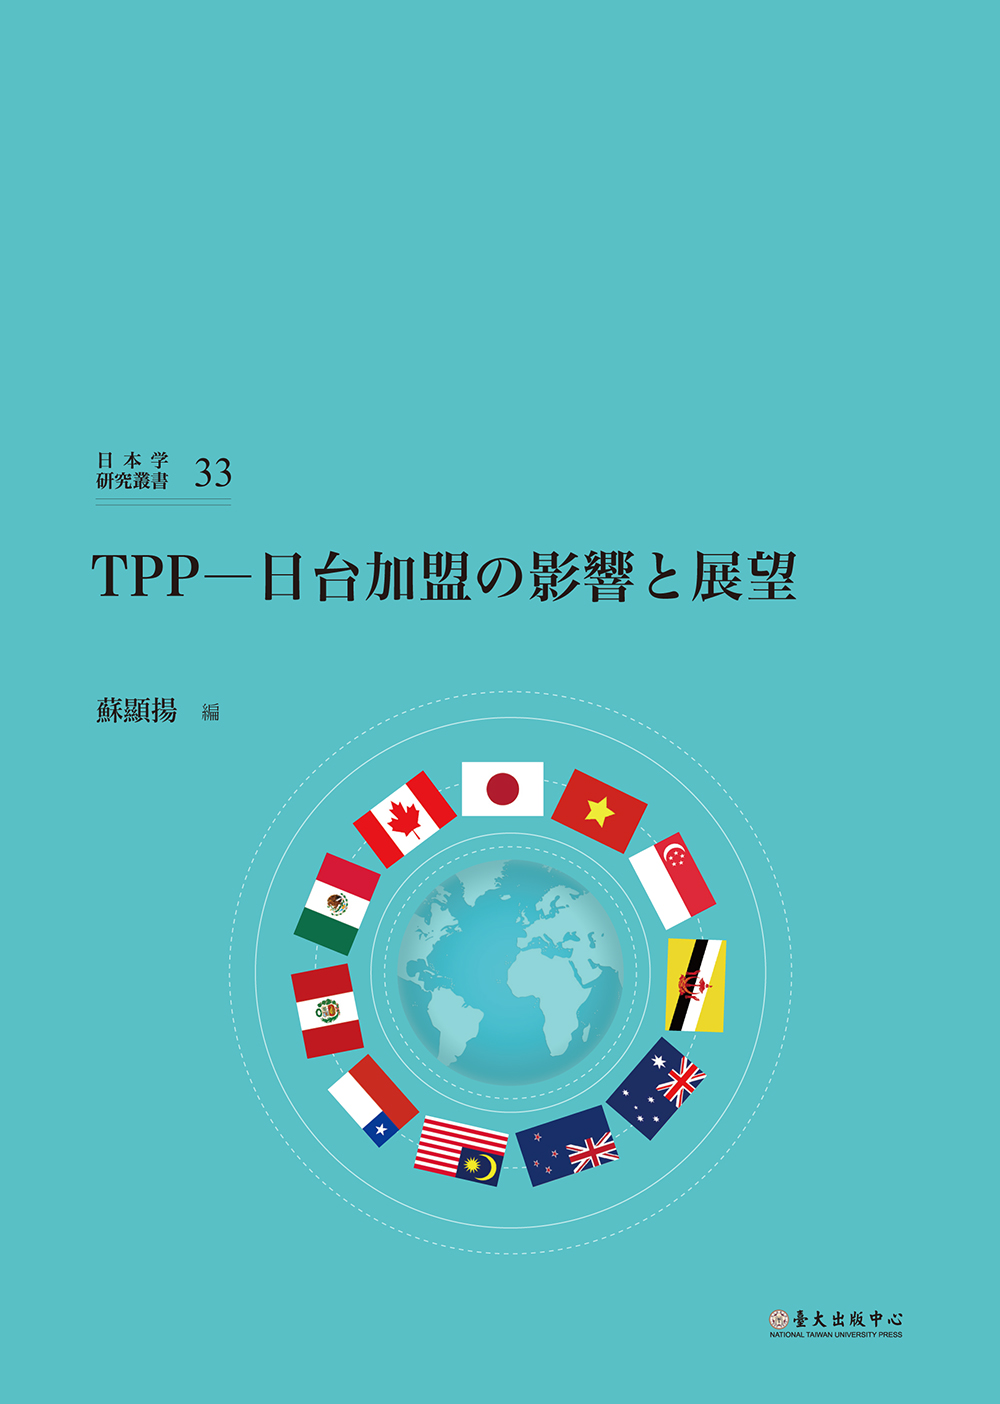 Trans-Pacific Partnership: The Joint Impact and Outlook for Taiwan and Japan